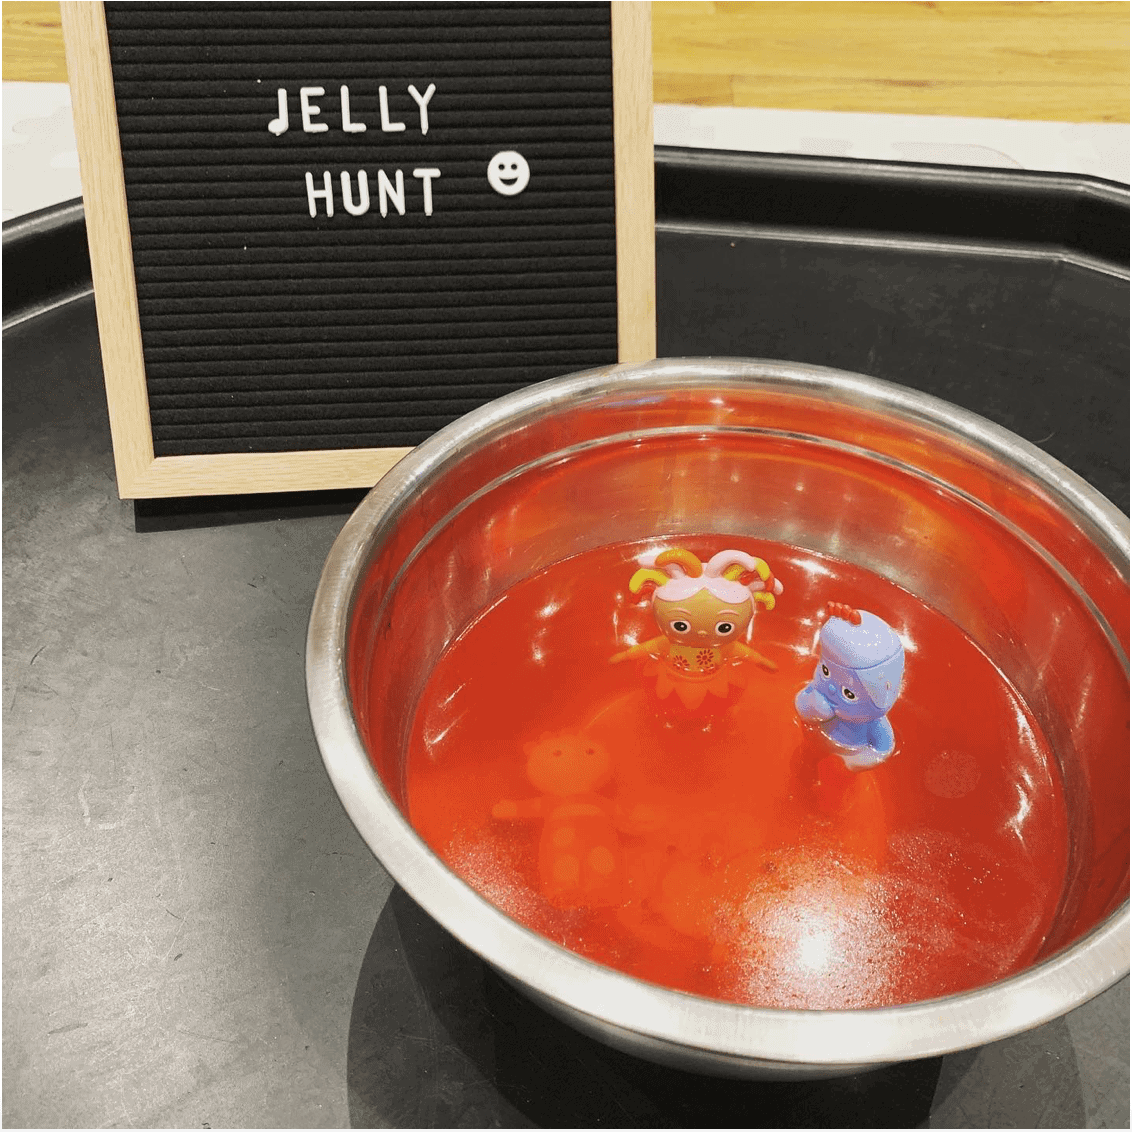 1 of 3 Sensory Play Activities for Your Toddler, jelly, toddler toys, sensory play